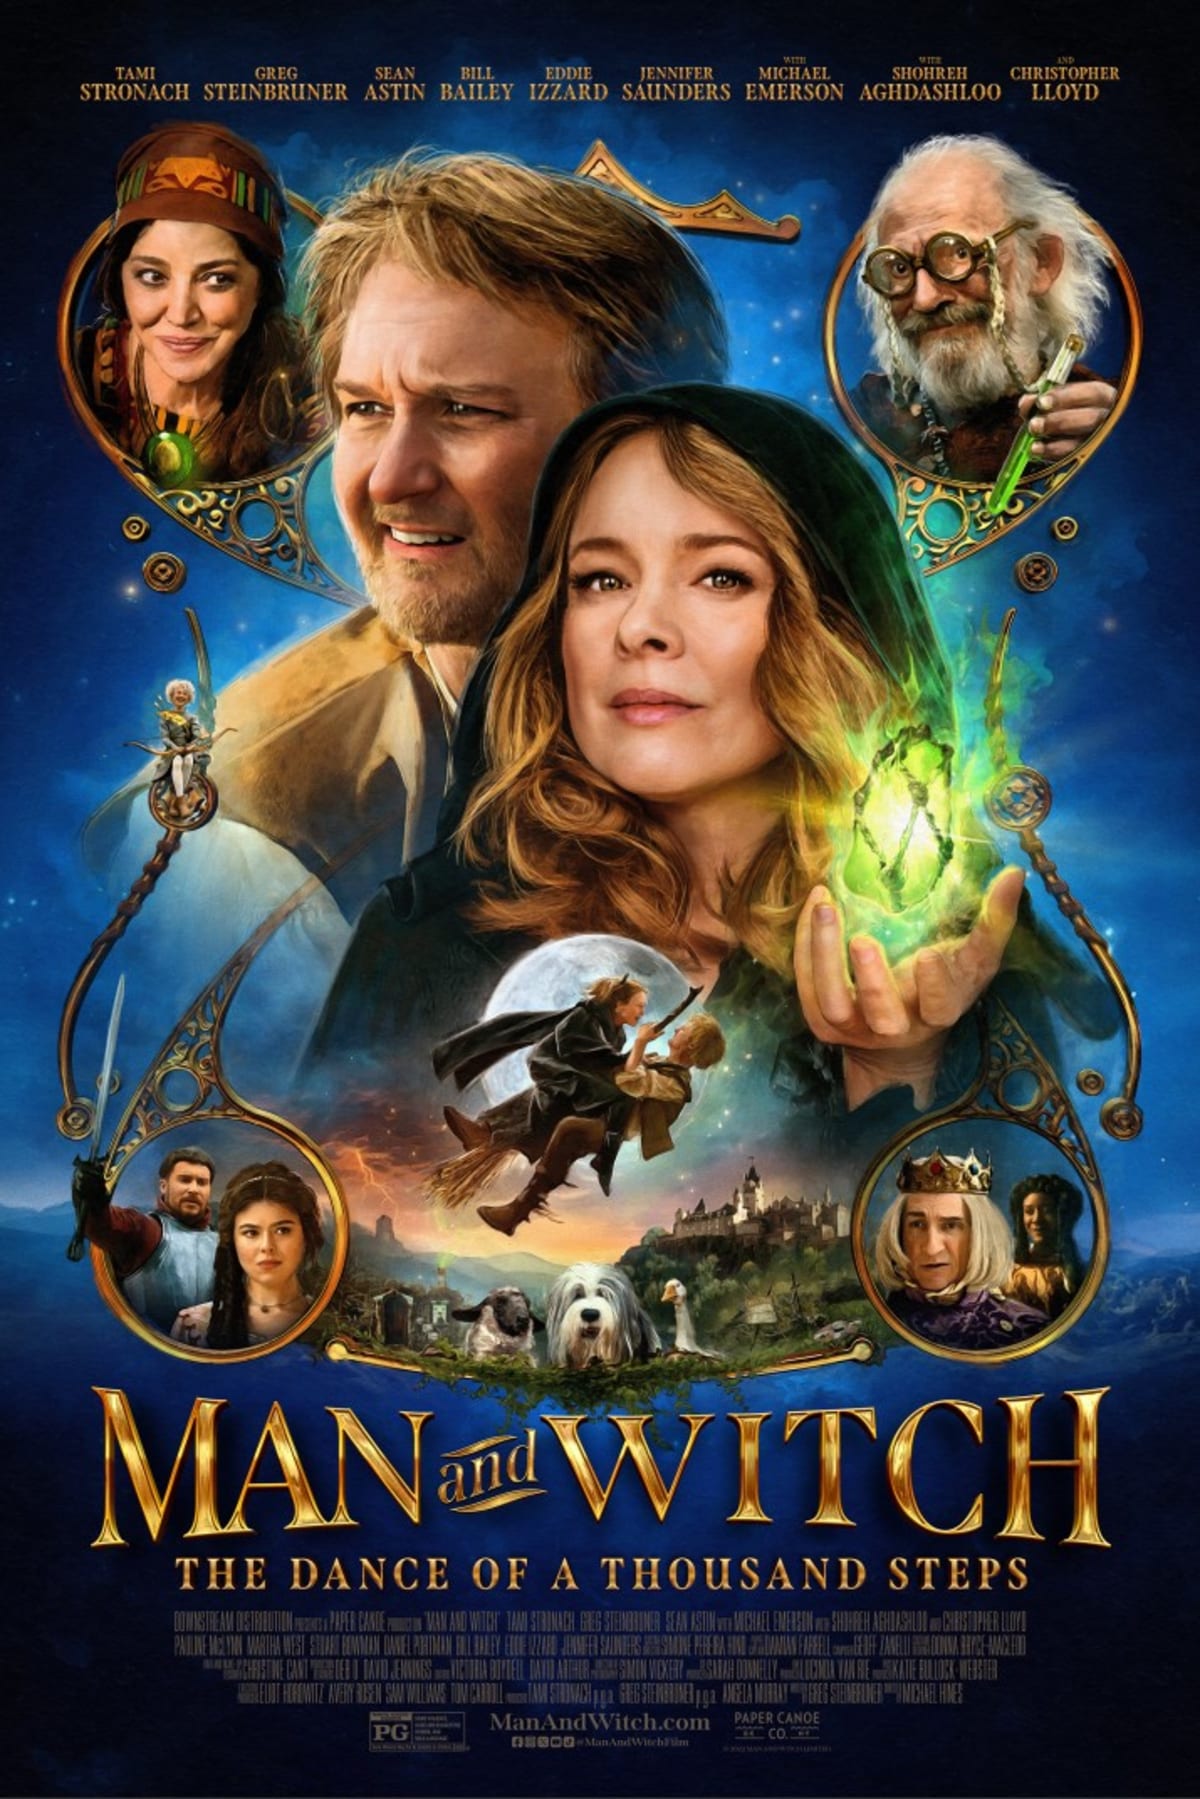 Man and Witch: The Dance of a Thousand Steps